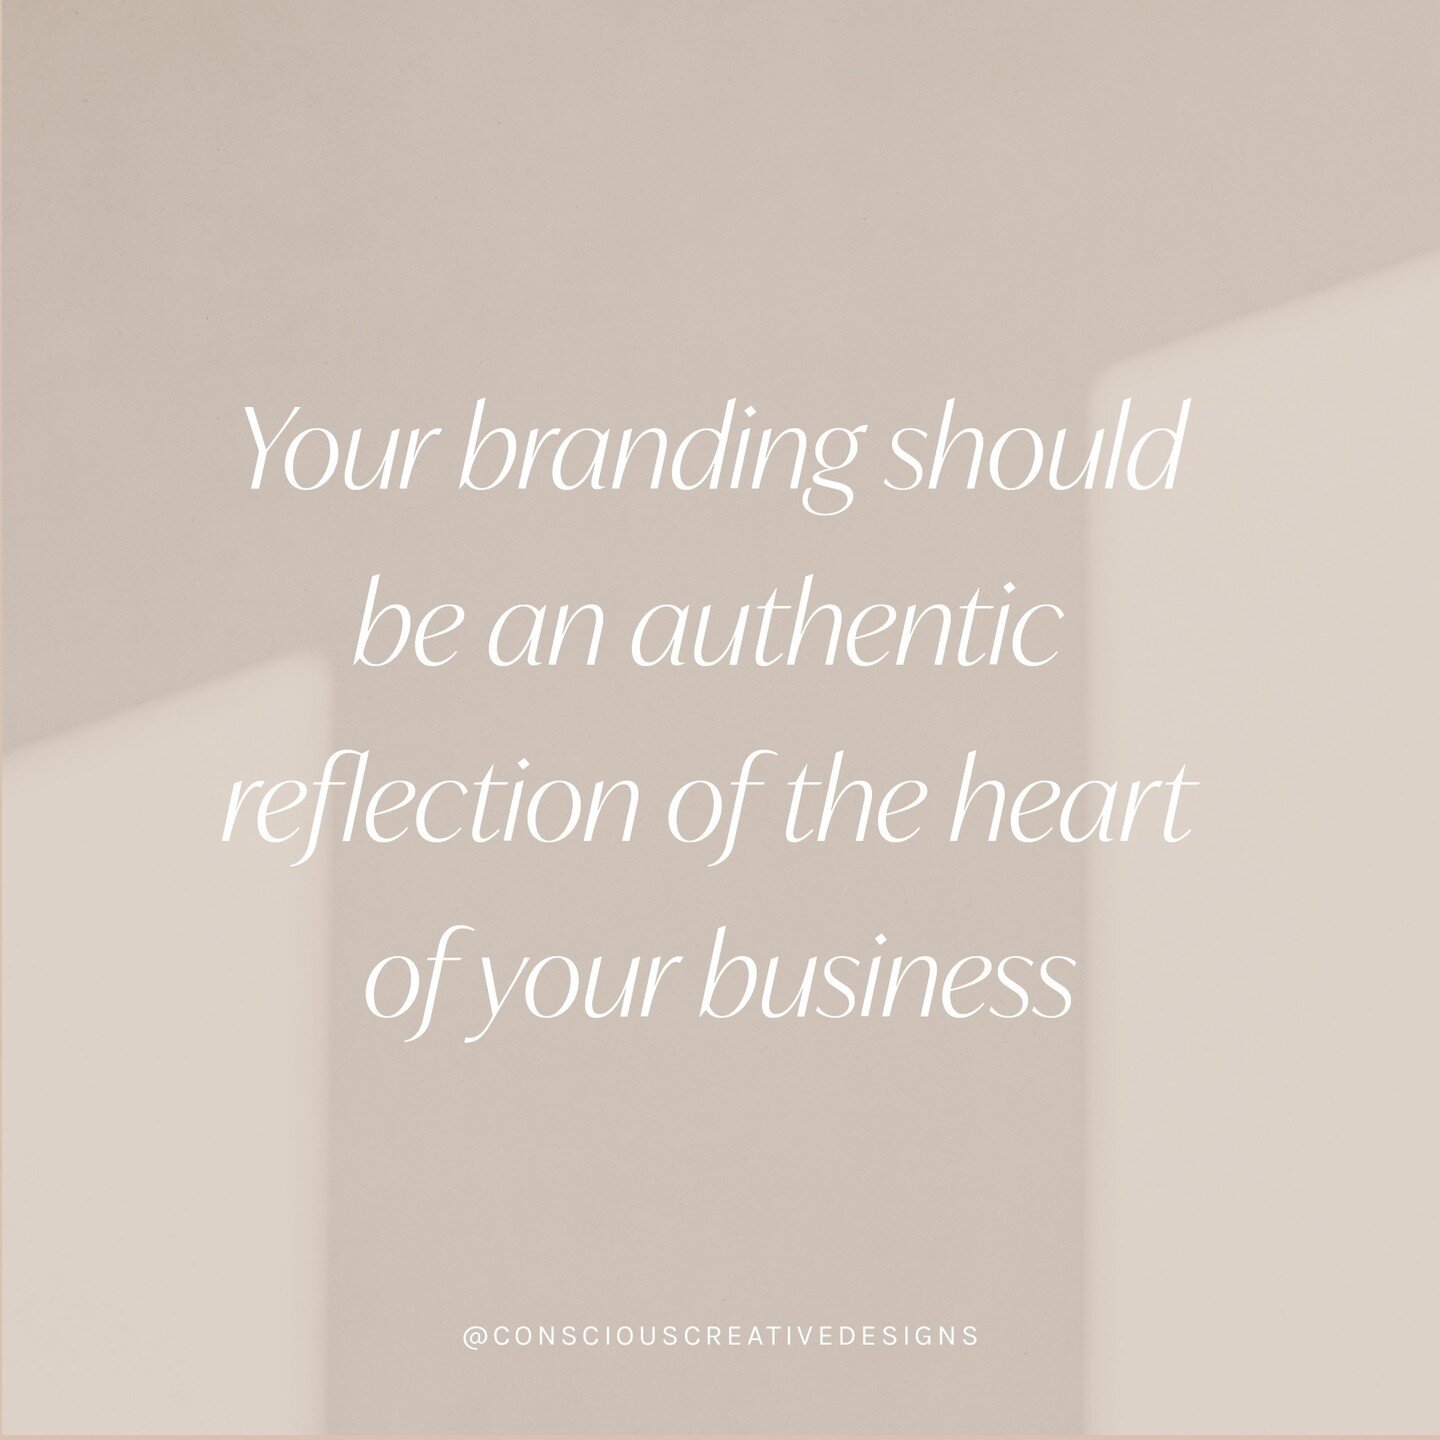 Your branding should be an authentic reflection of the heart of your business. Intentionally selected fonts, colors, and logos combine to visually tell a story about who you are and what you do ✨

Ready to elevate your online presence? Let's chat! Fi